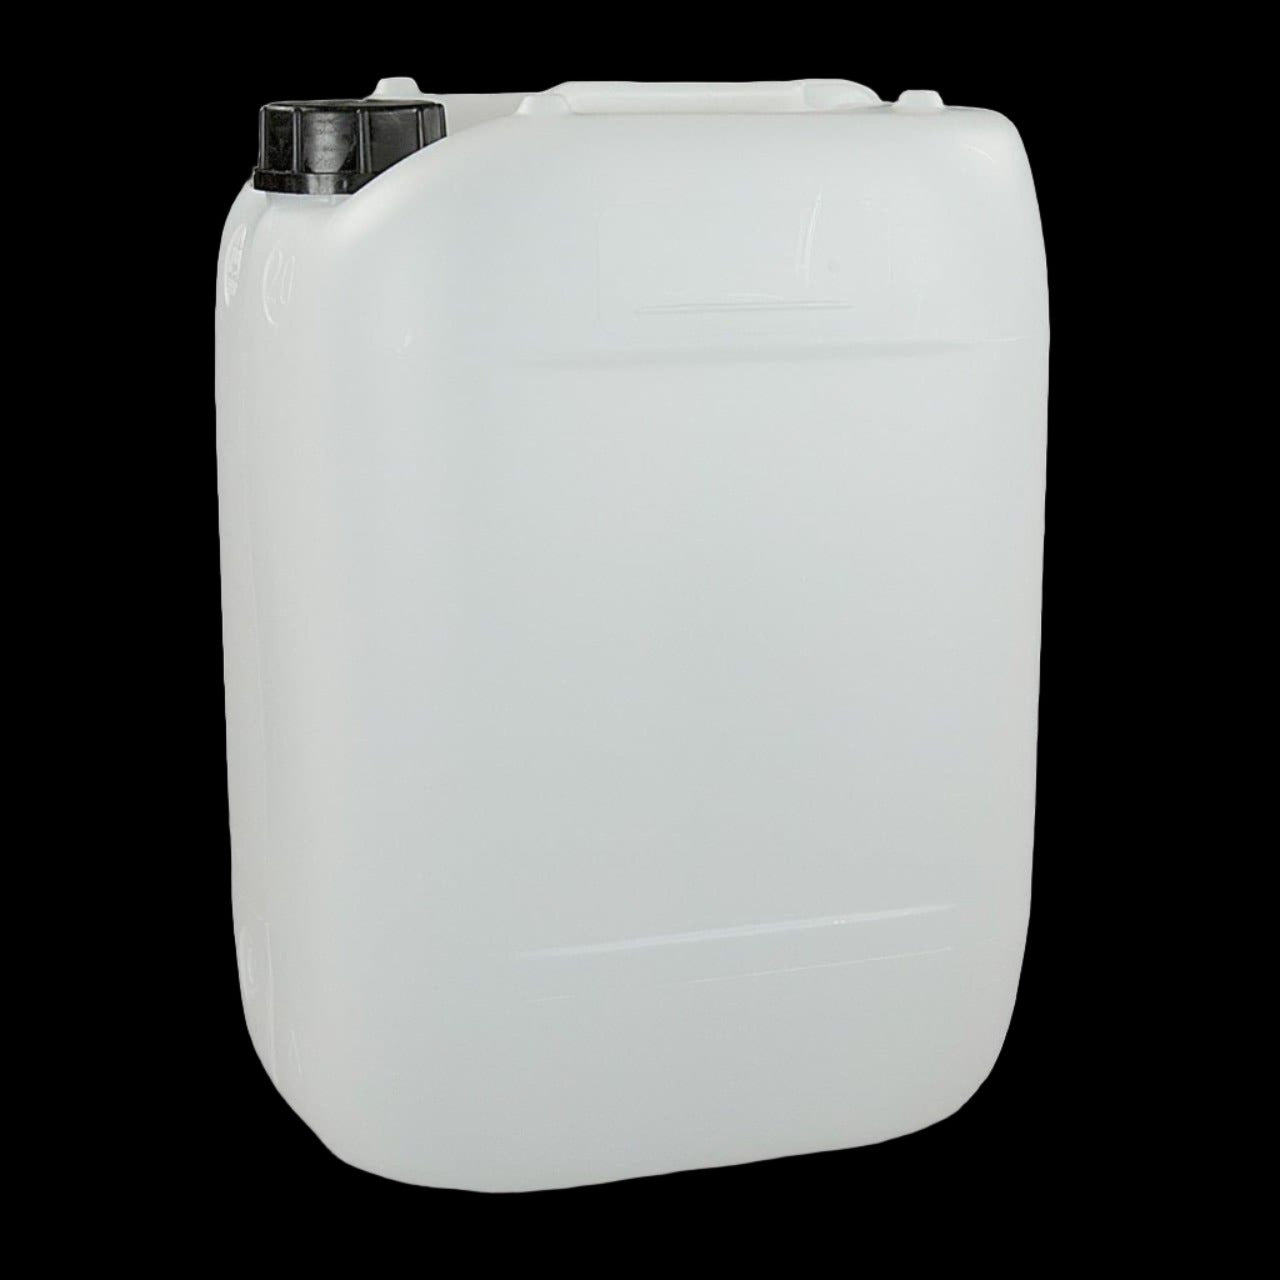 Water Barrel Drum 10-25ltr £8 Tropical Supplies North East